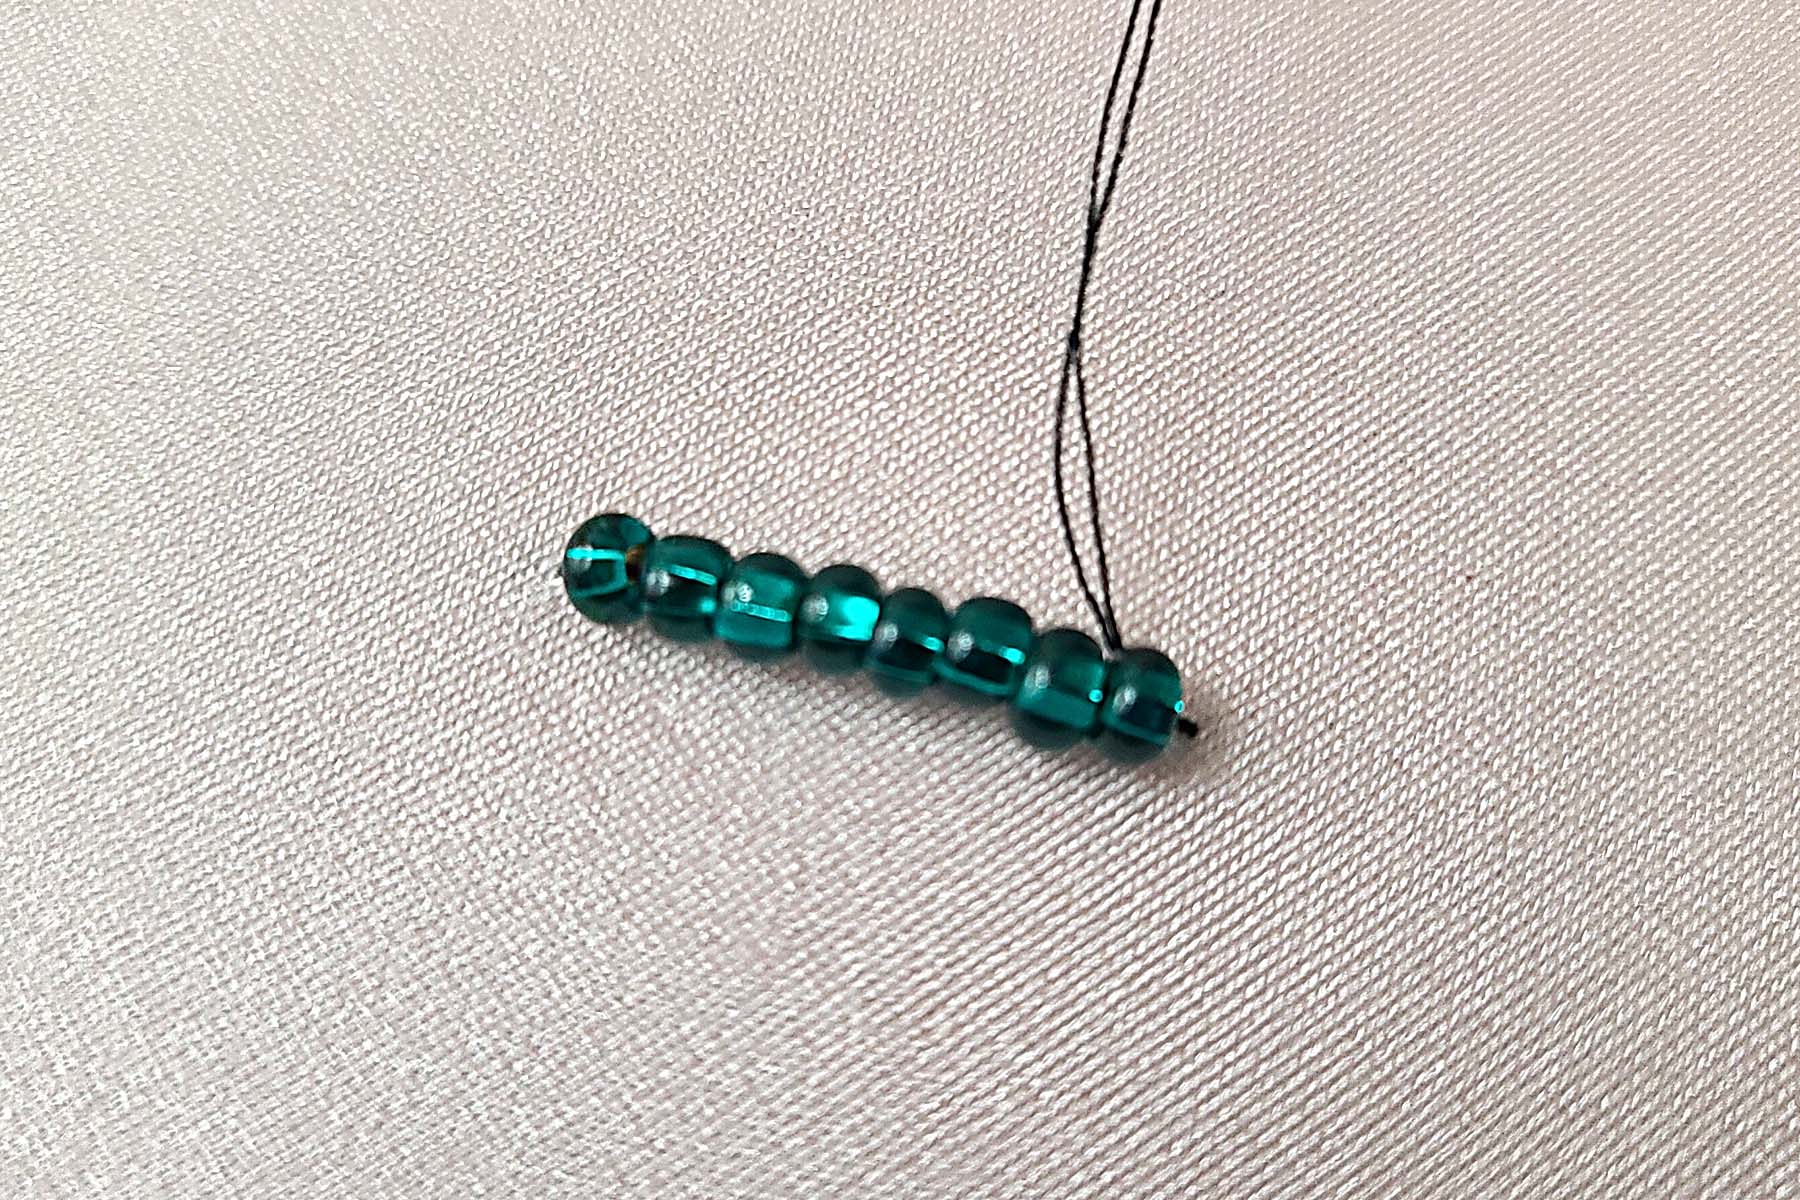 Black thread is being used to sew a short line of dark green rocaille beads to a stretched piece of light pink spandex.